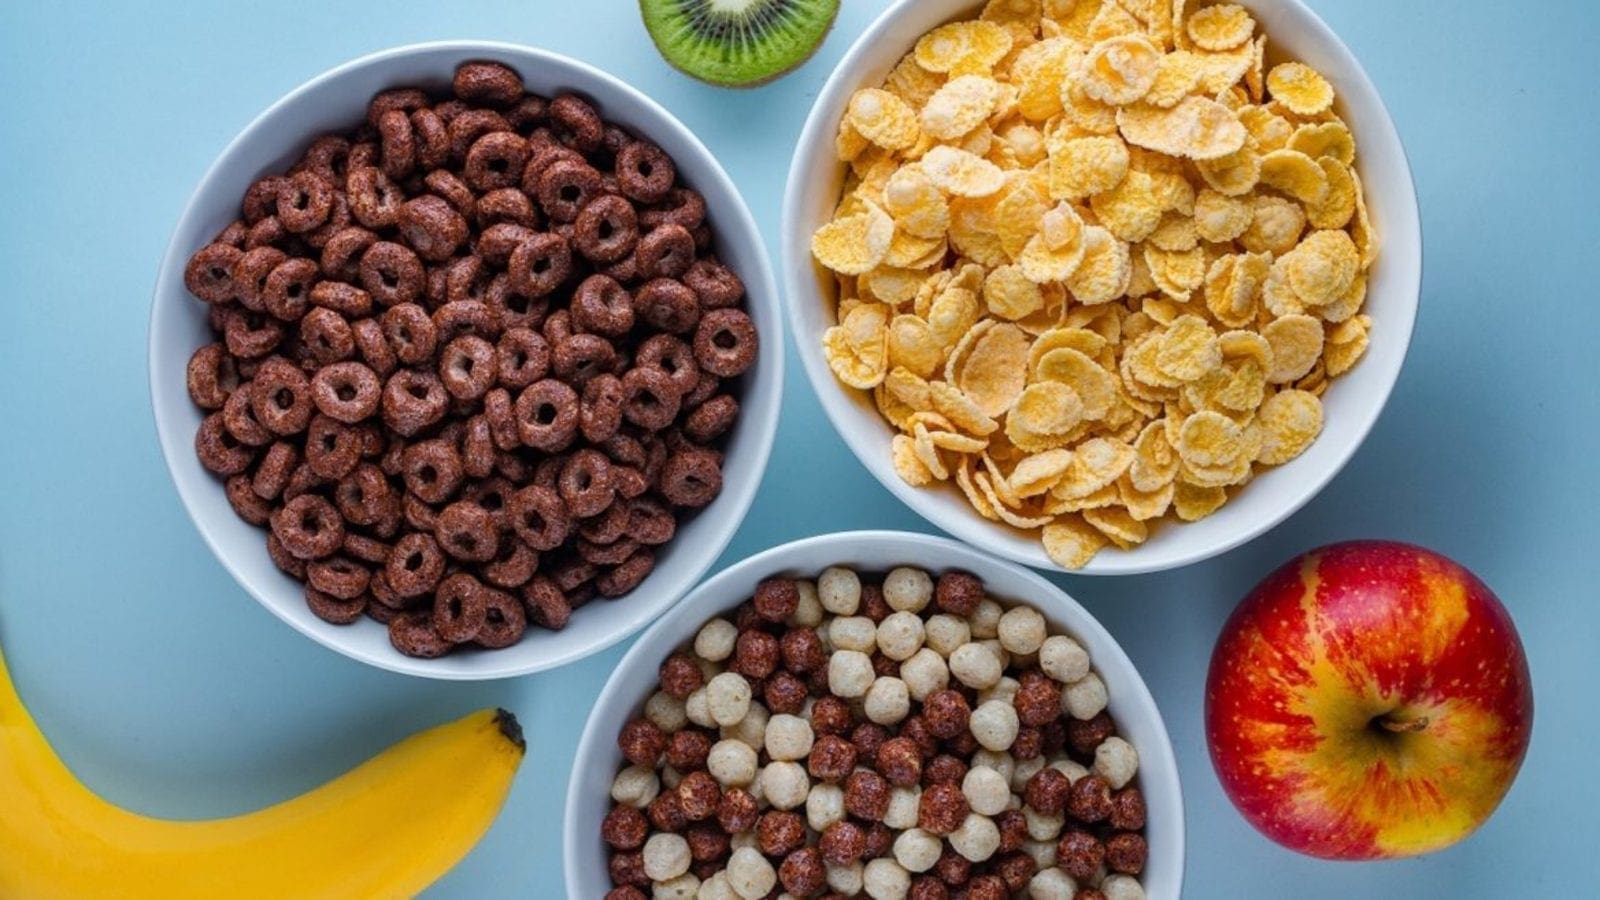 US breakfast cereal industry thrives amid COVID-19 as sales hit new record high